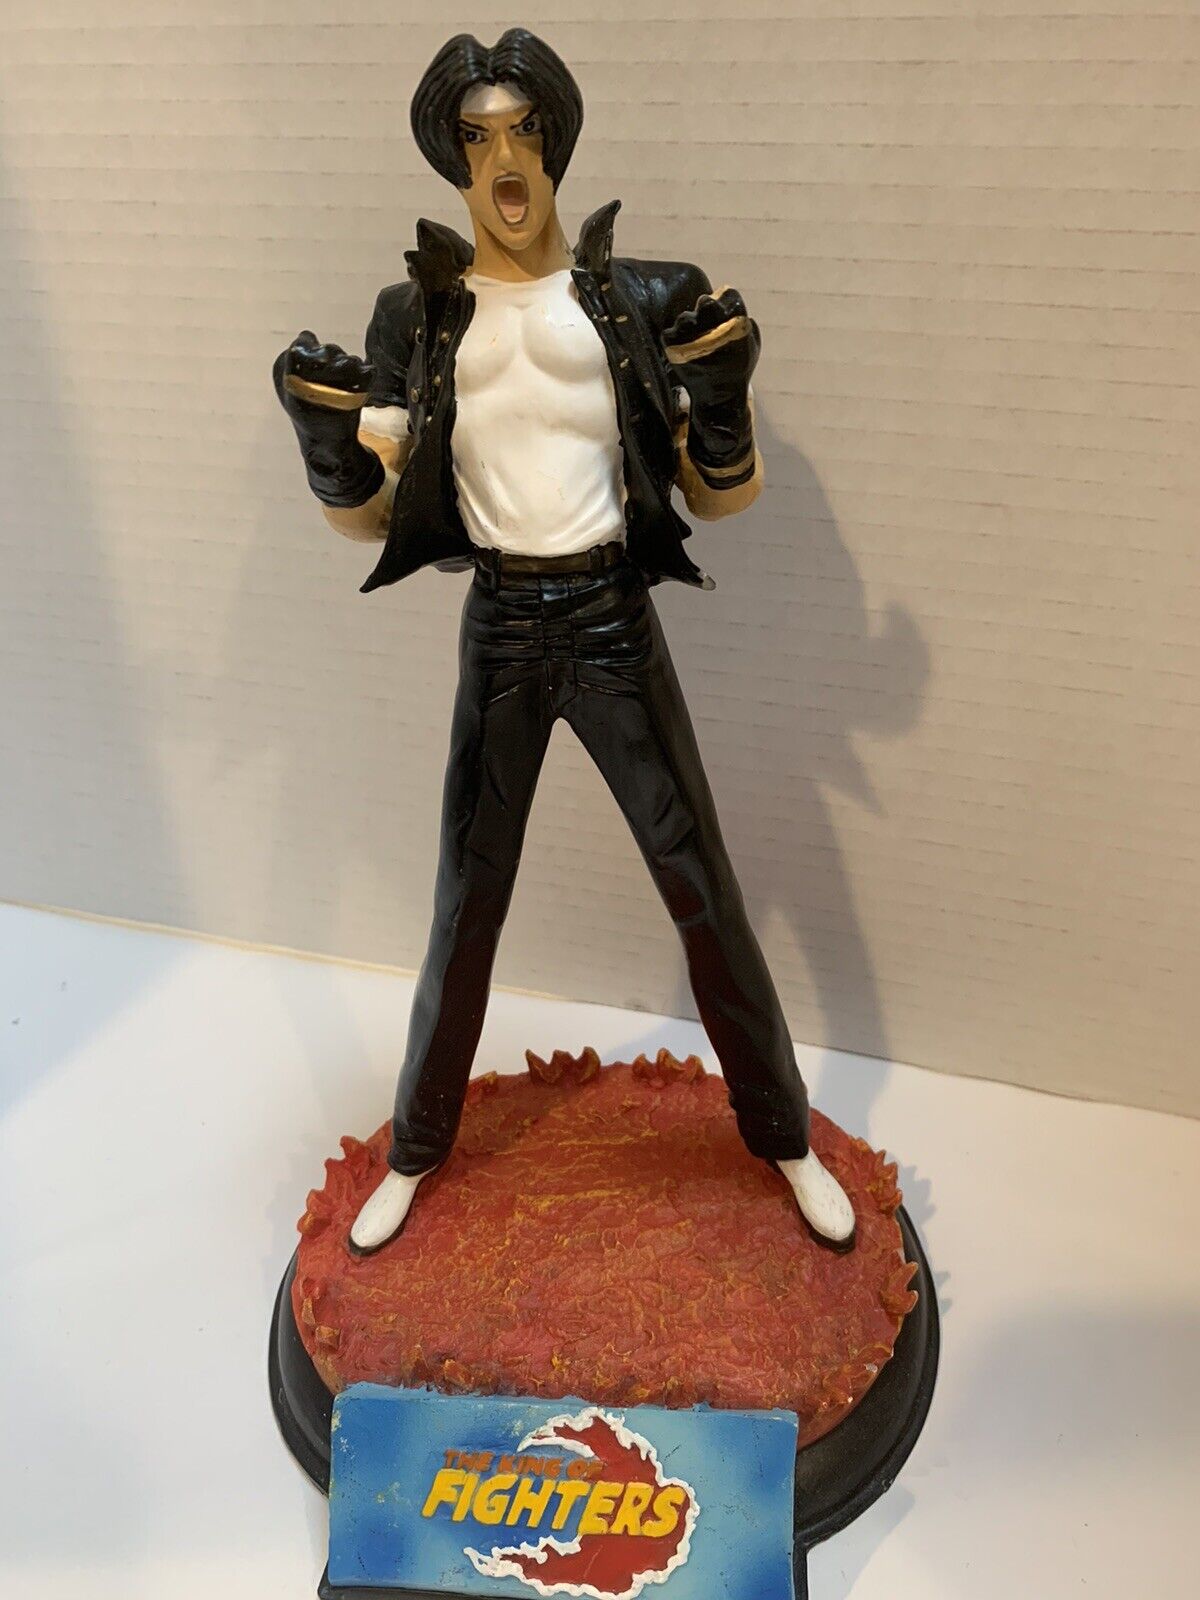 The King of Fighters 1997 Kyo Kusanagi  Scale Statue on Fiery Base